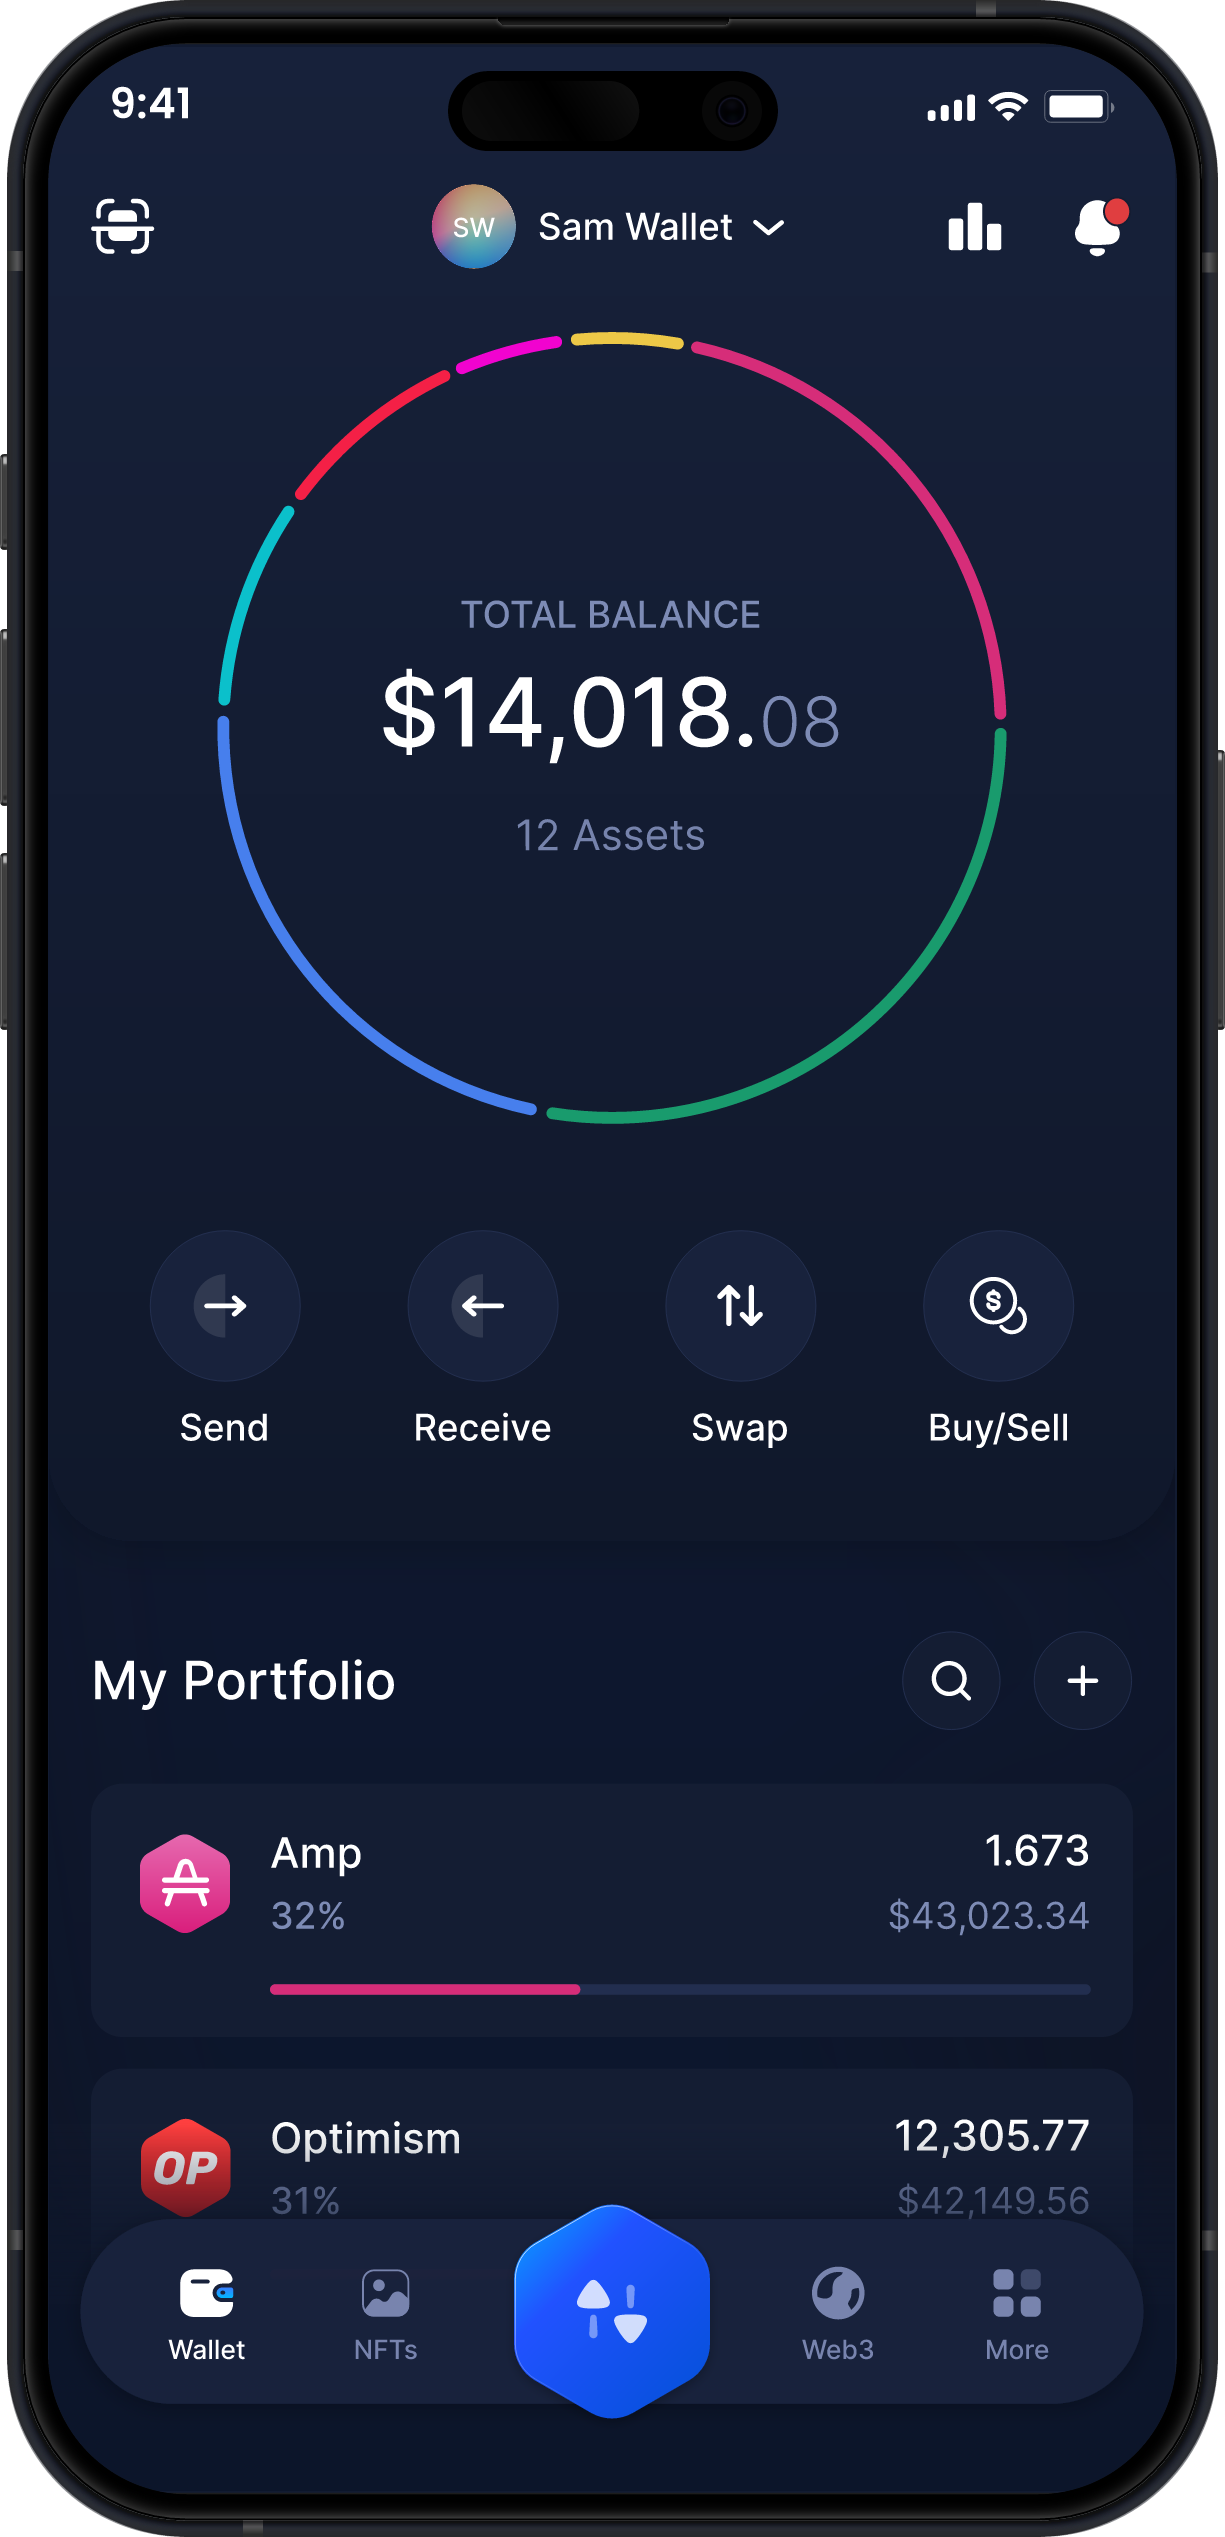 Infinity Mobile Amp Wallet - AMP Dashboard